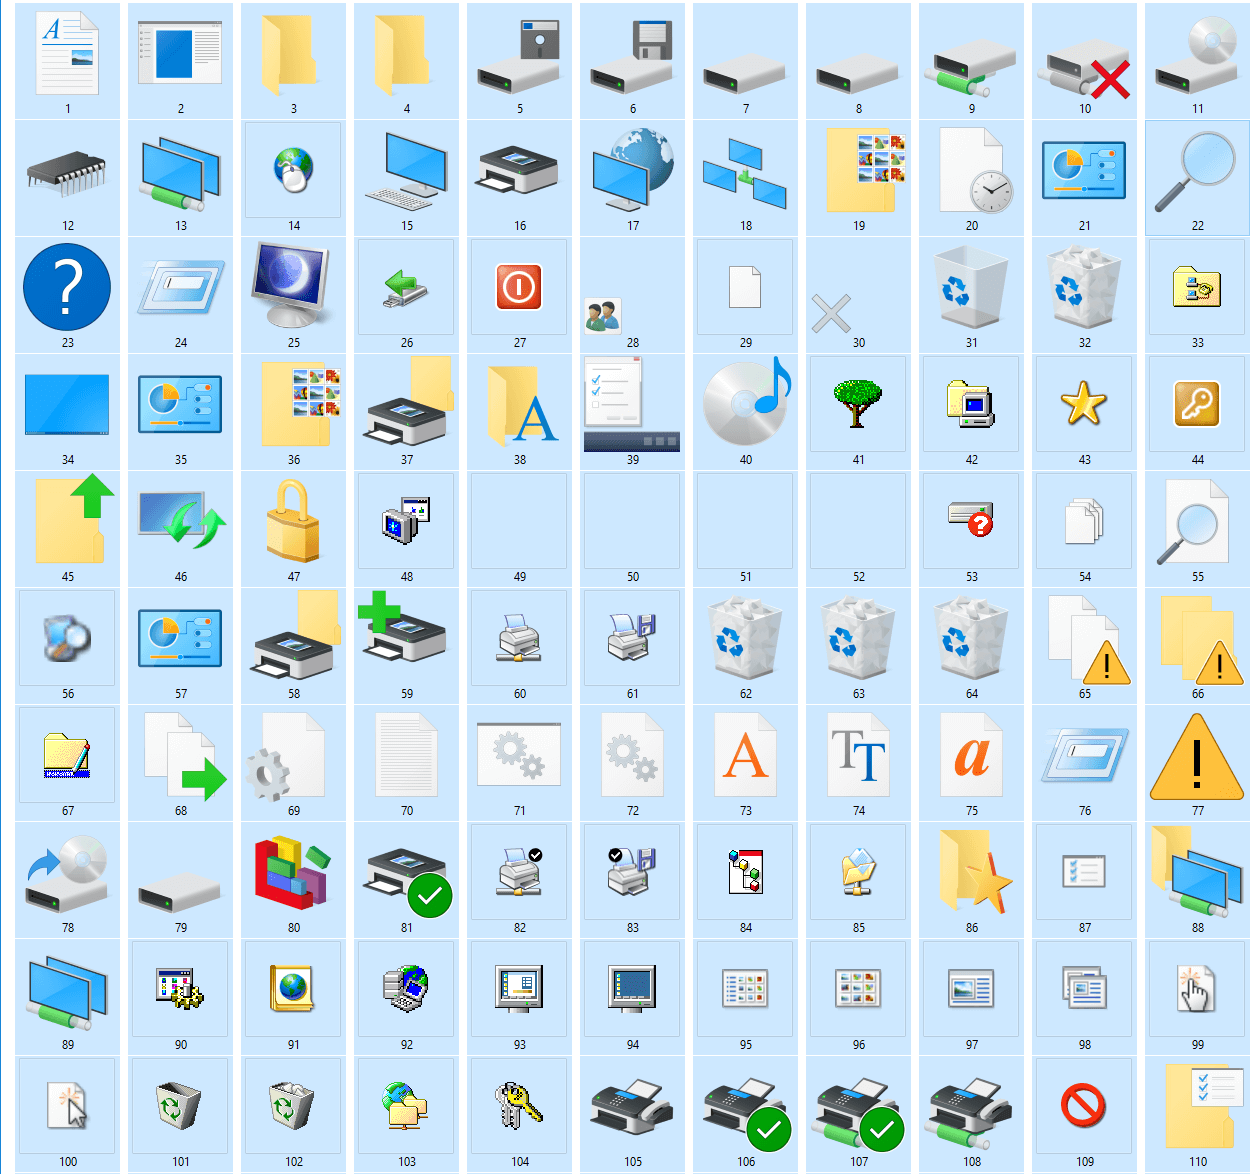 Windows 10 icons of shell32.dll (1/3)